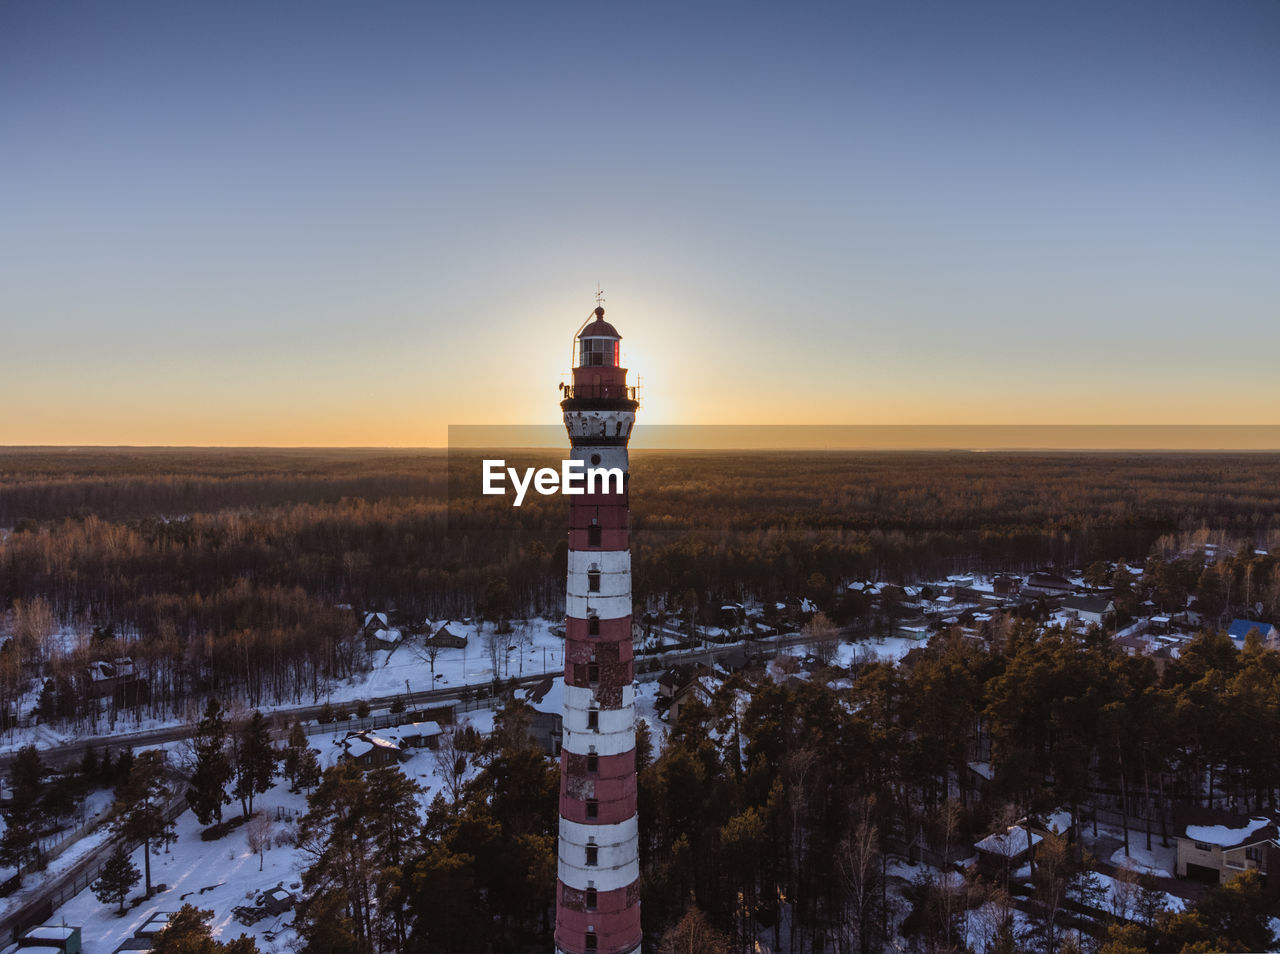 Lighthouse on the shore of the lake, illuminated by the rays of the evening sun. aerial photography